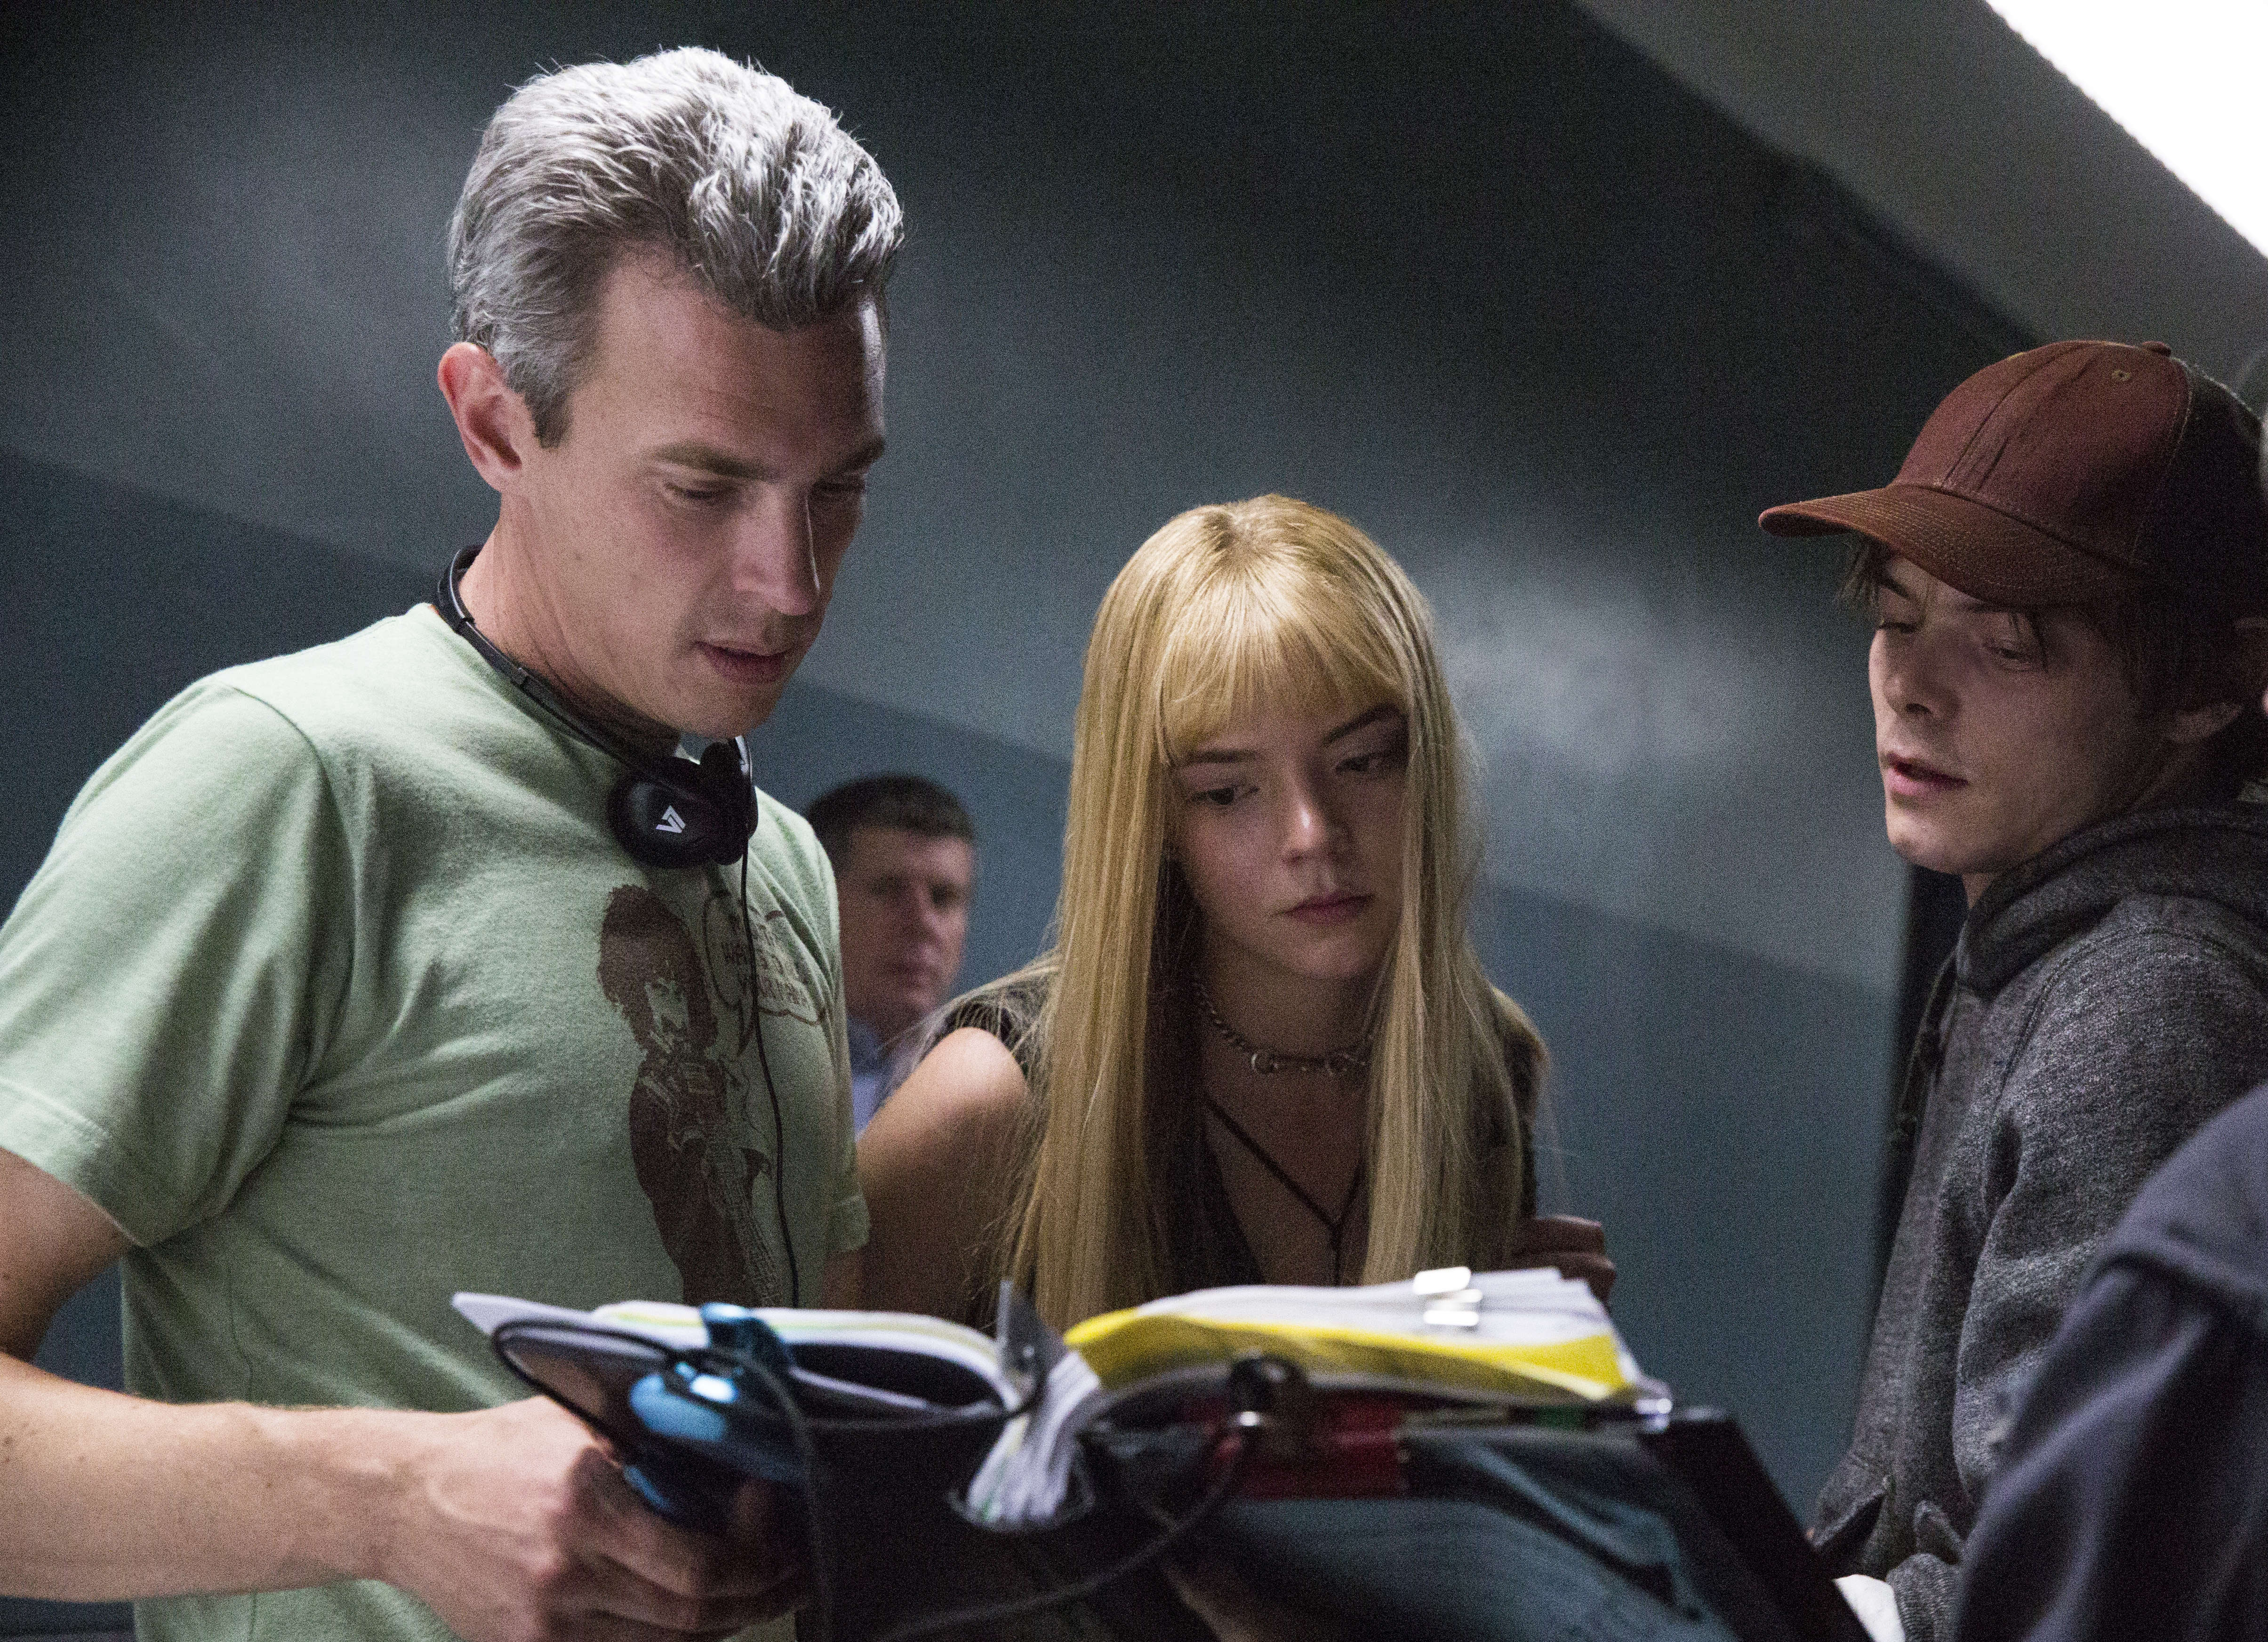 A new trailer reminds us that THE NEW MUTANTS is still a thing